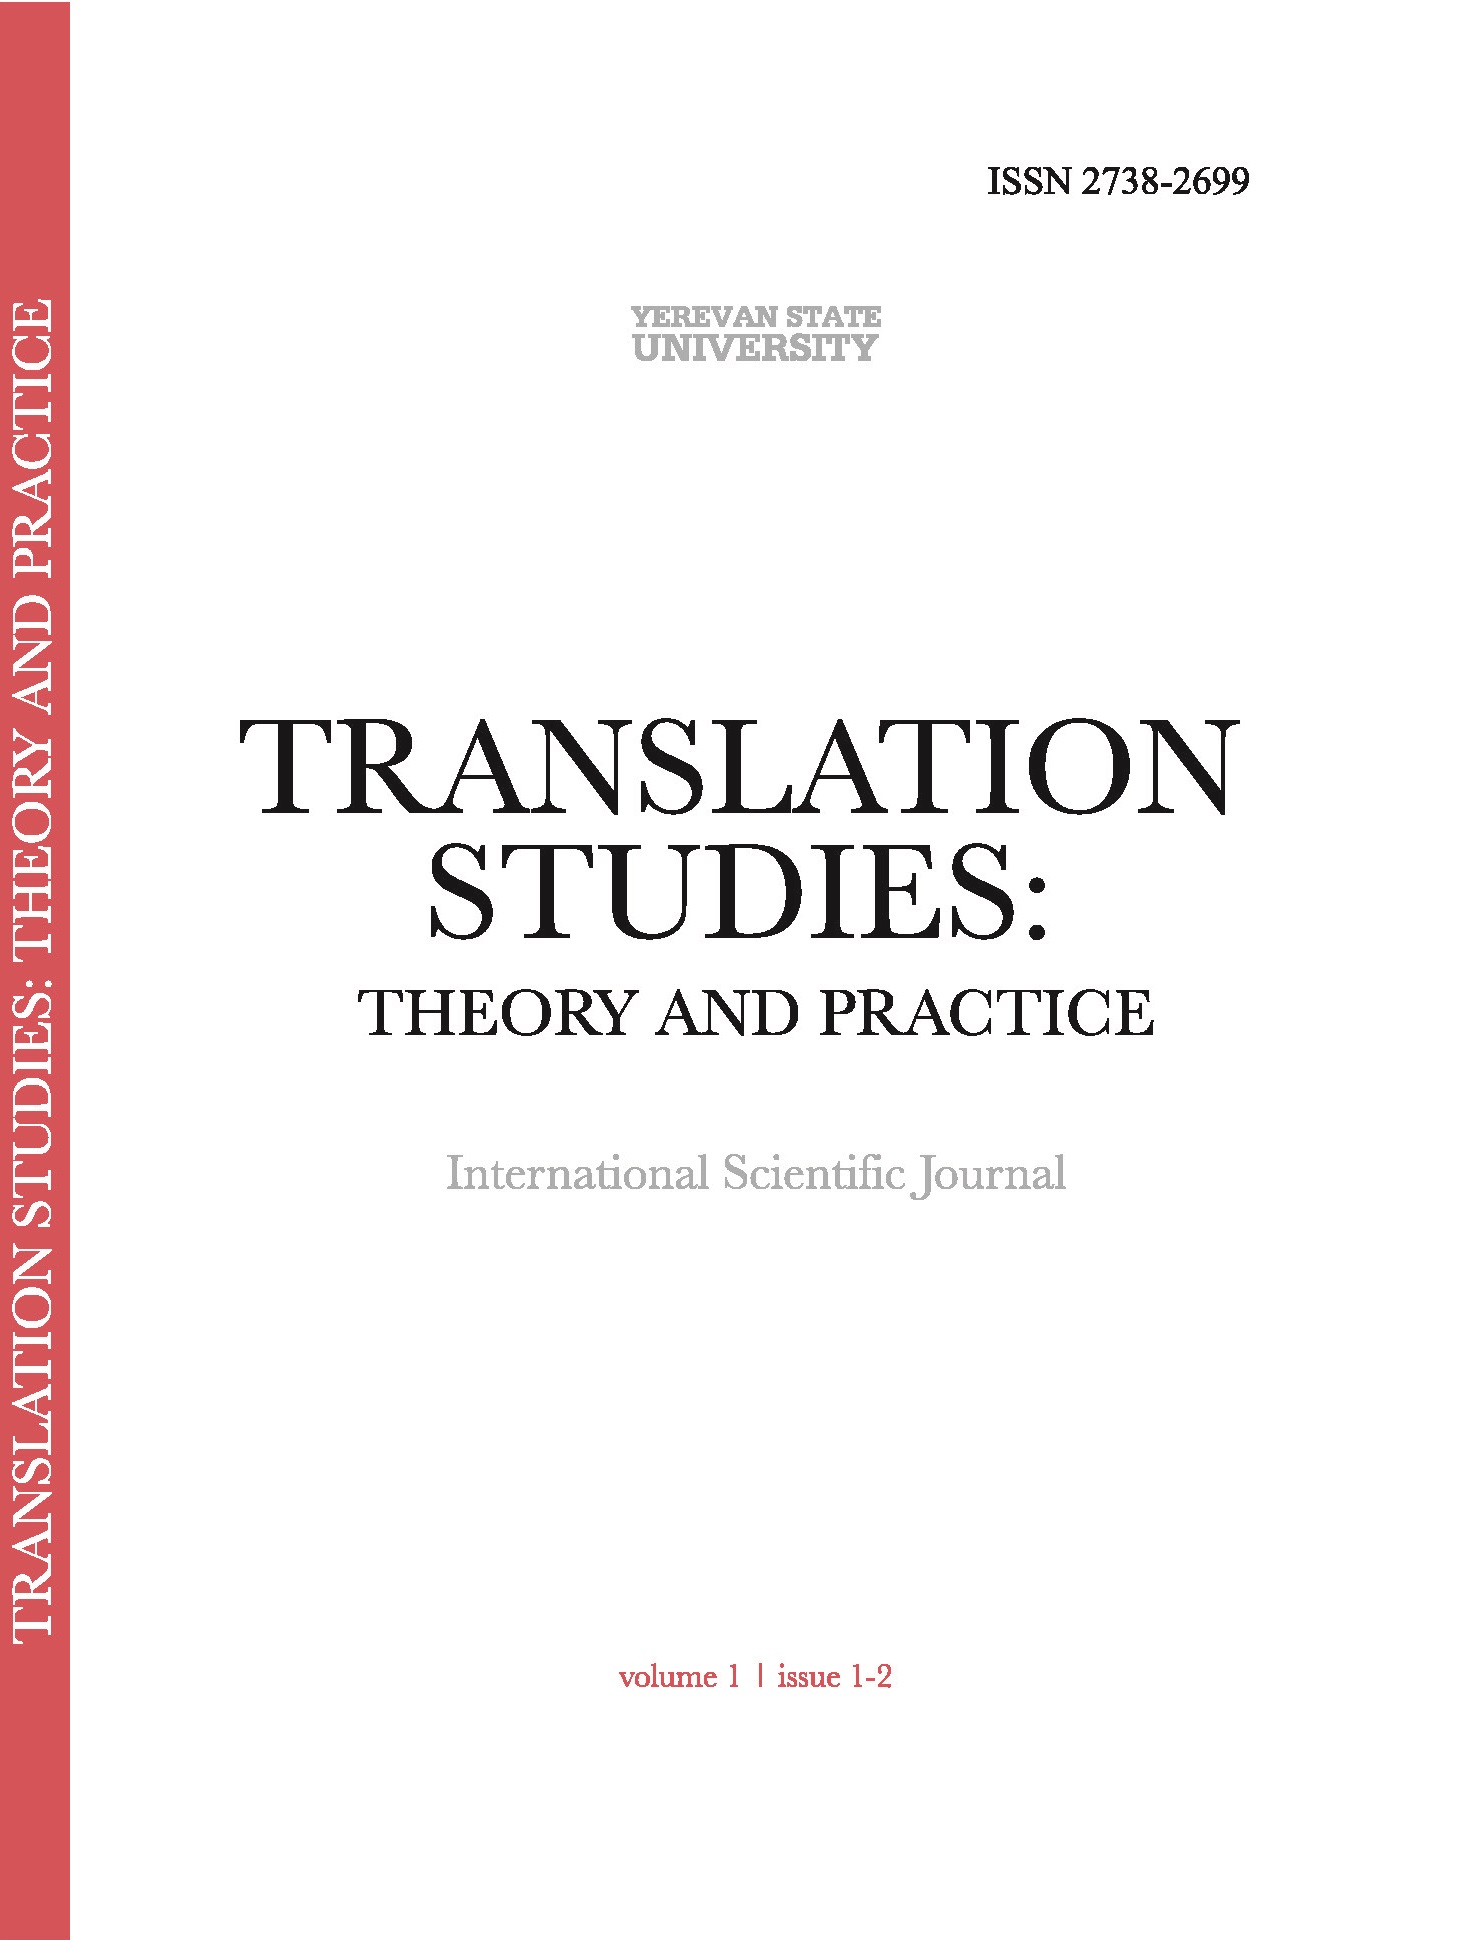 TRANSLATION STUDIES: THEORY AND PRACTICE